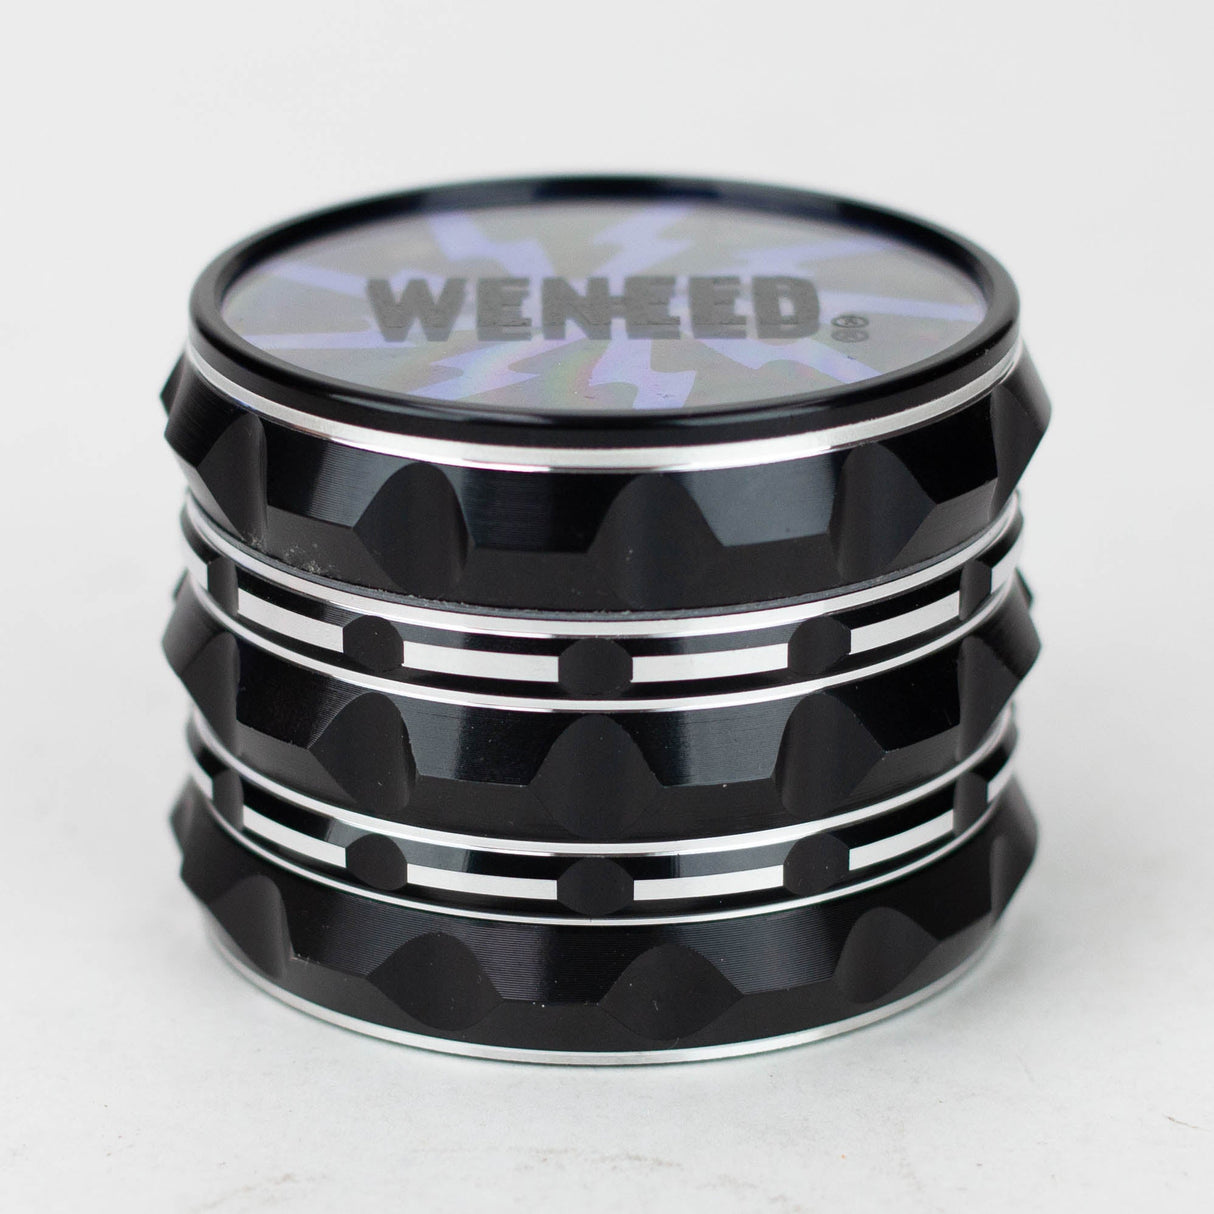 WENEED®-Power grinder with acrylic window 4pts 6pack